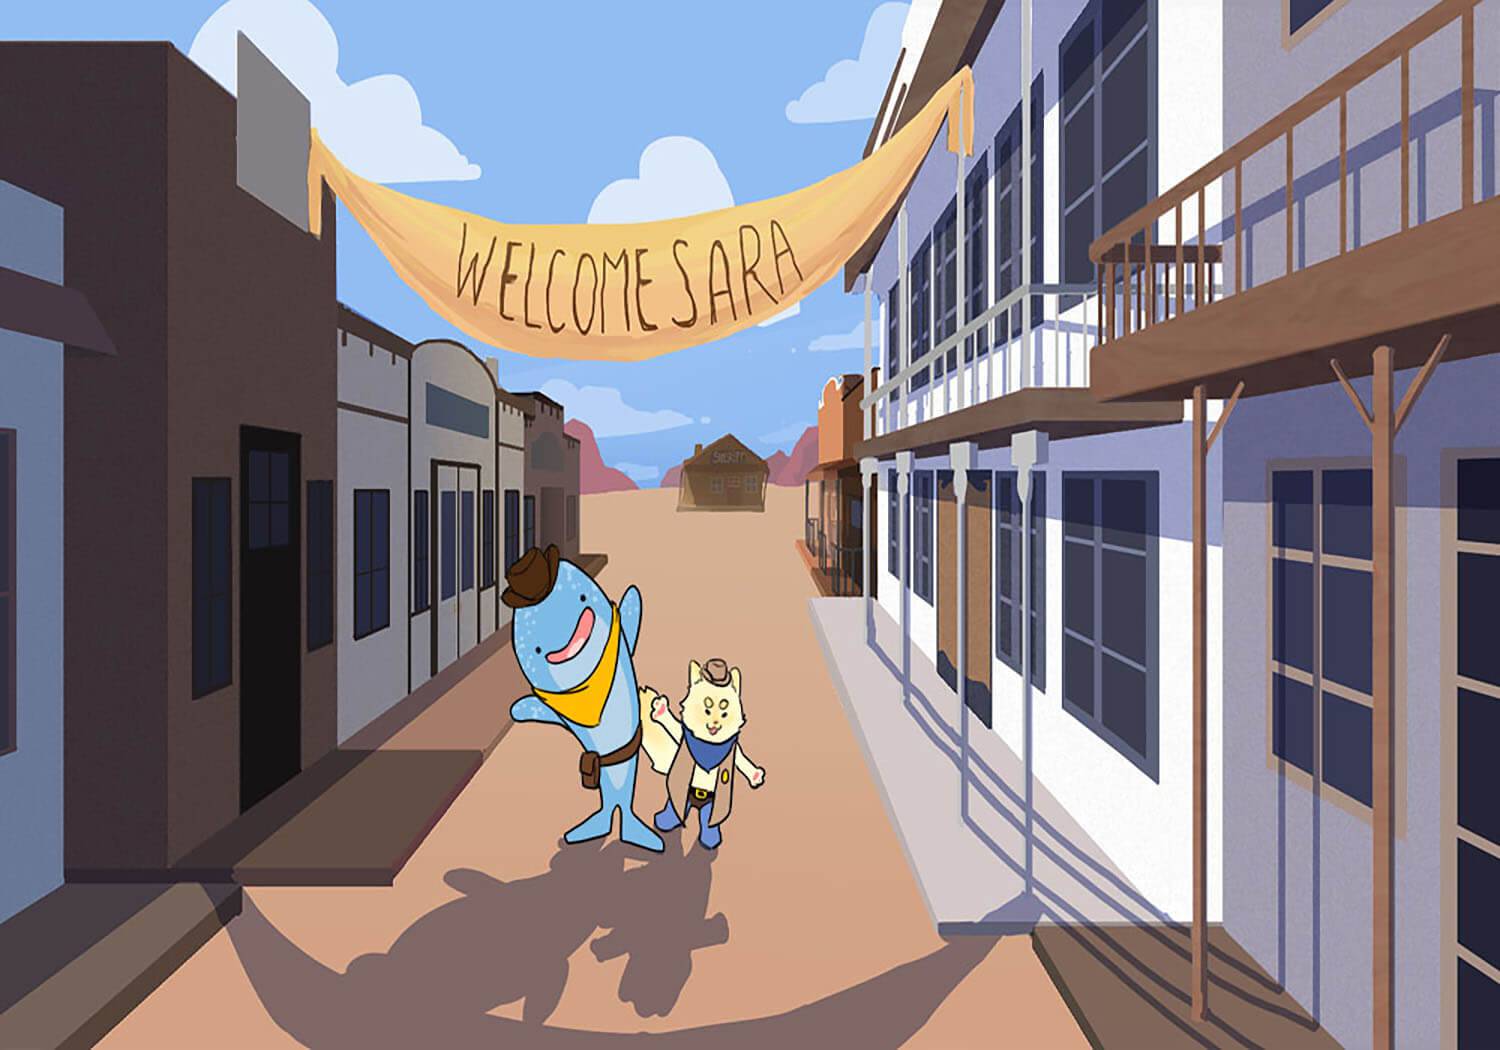 A cat and Shark stand in a western town as they welcome the viewer.